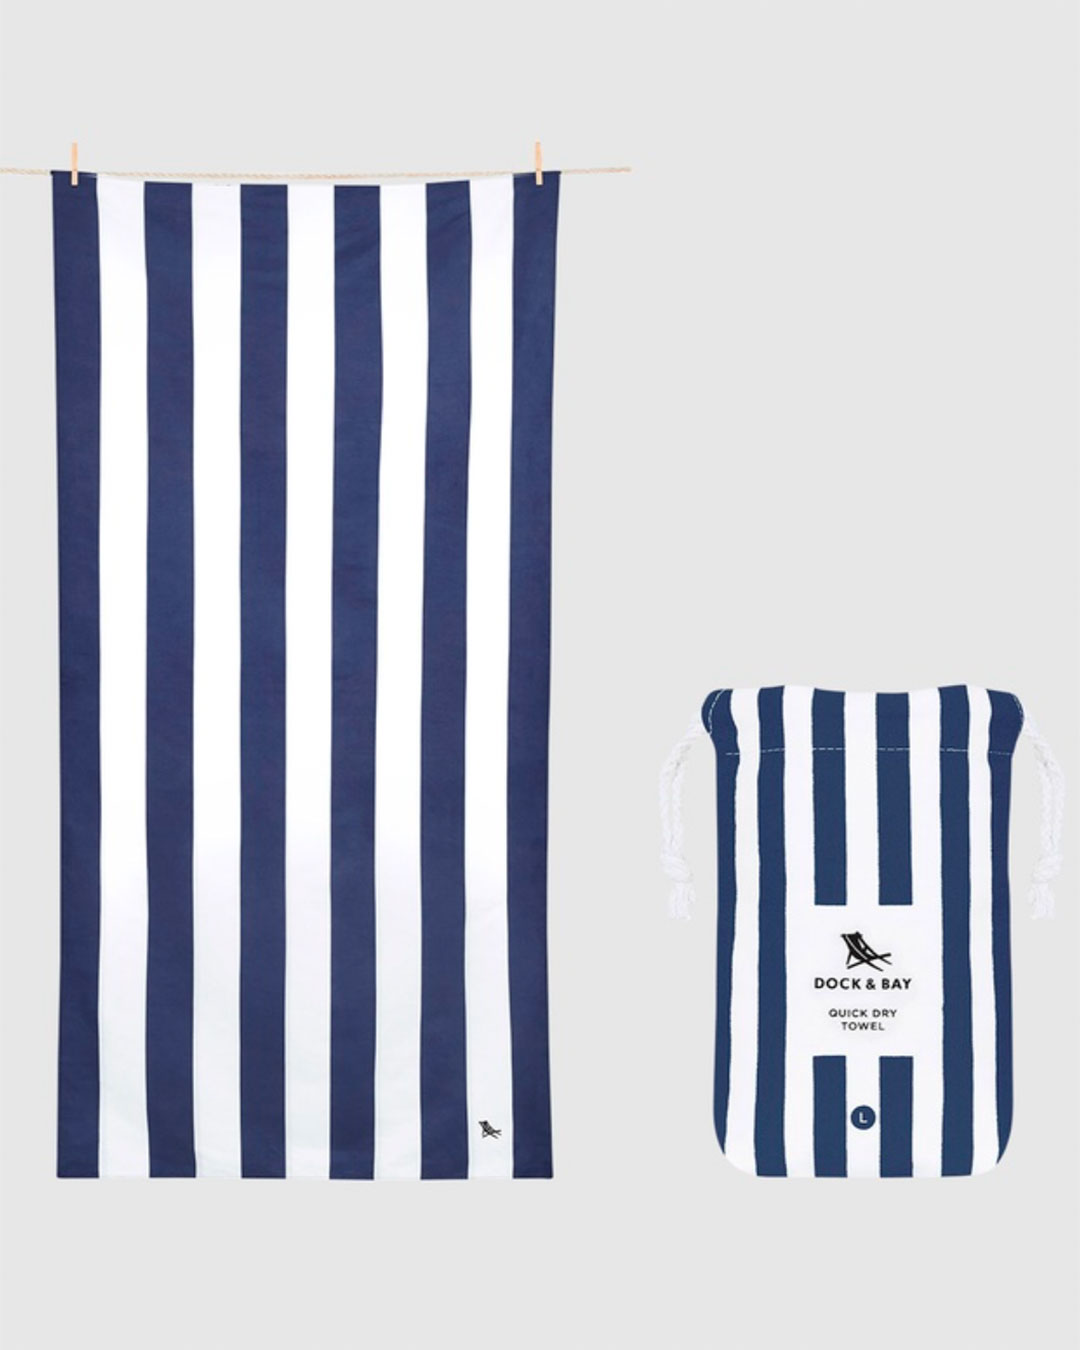 A large dark blue and white striped beach towel with a matching drawstring bag.